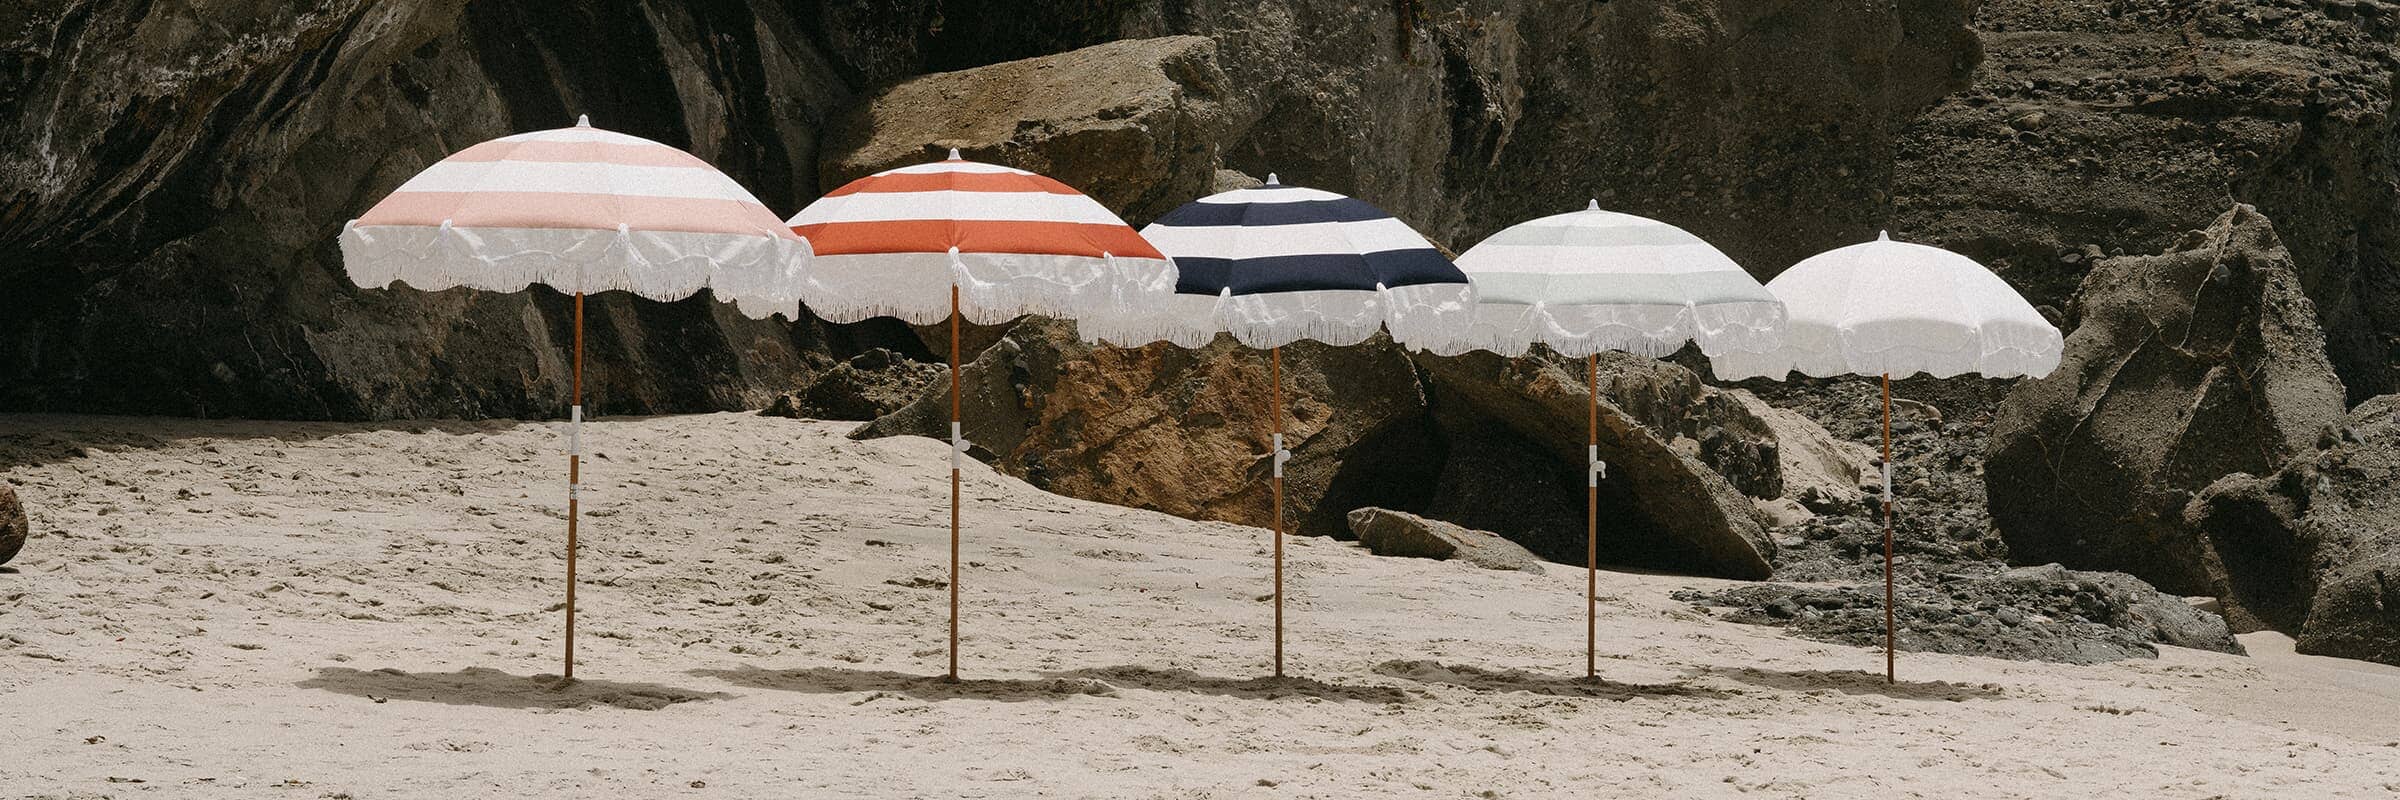 Holiday Beach Umbrellas in five colors in the sand